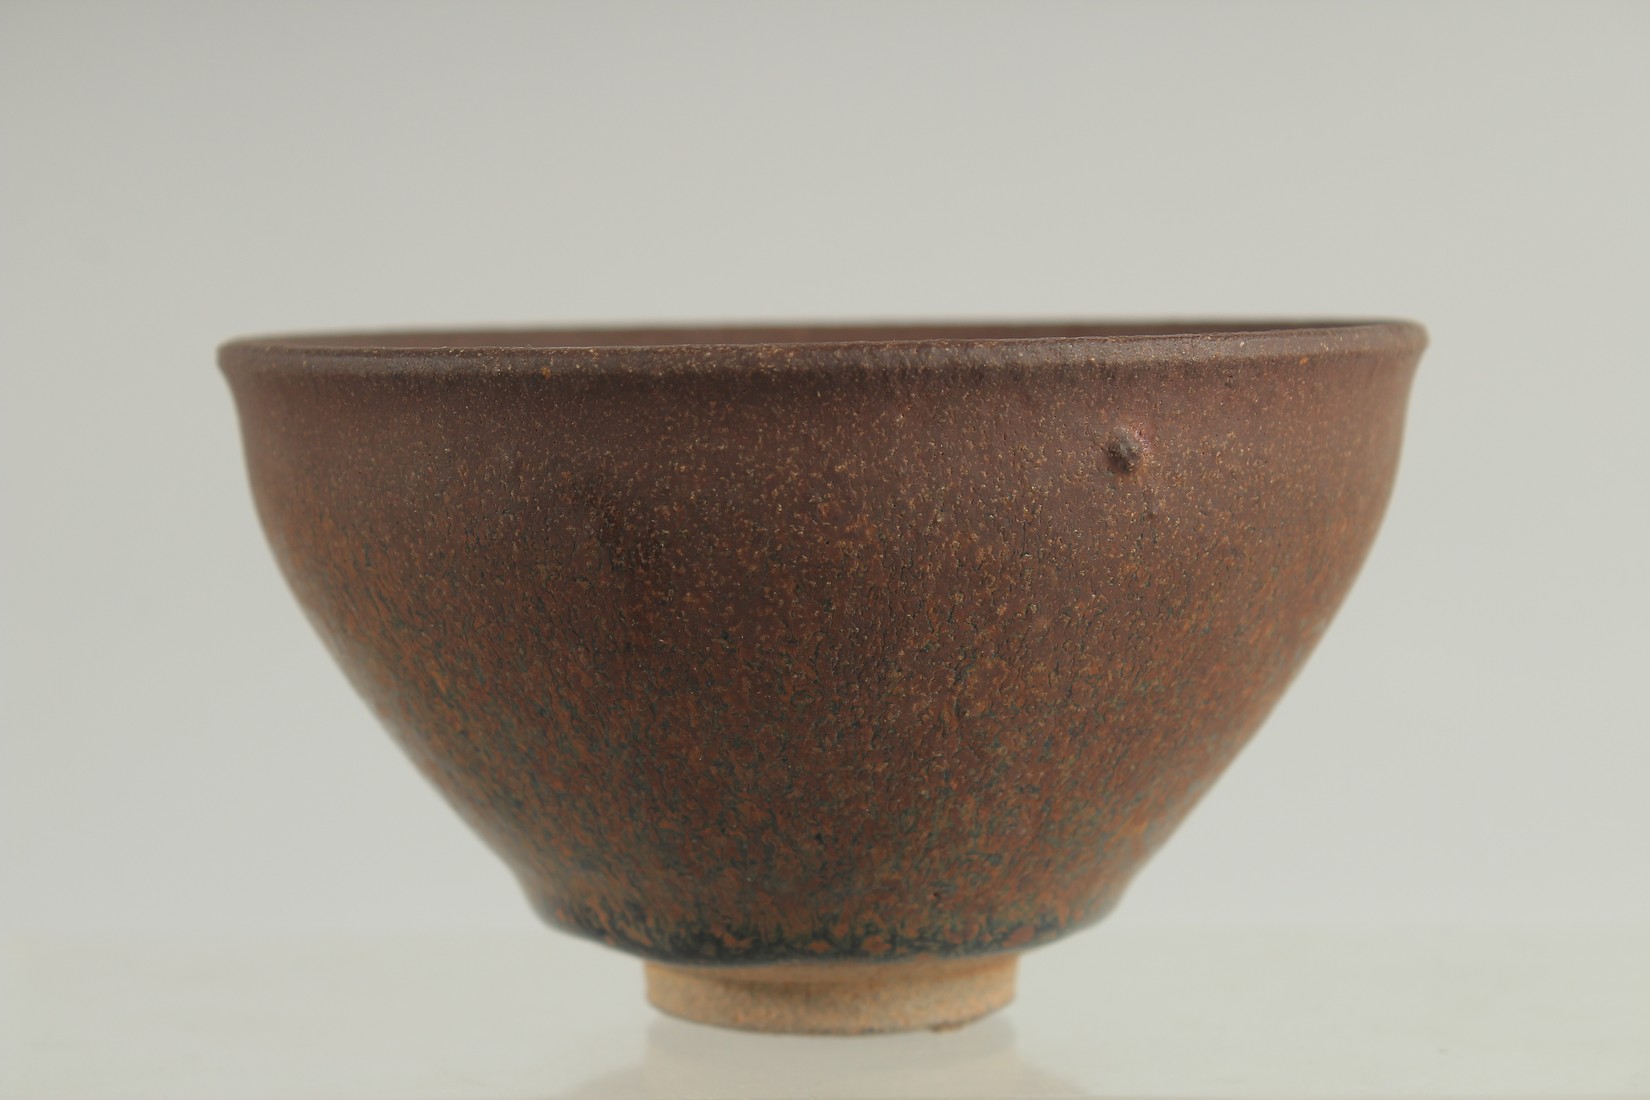 A CHINESE JIAN WARE BOWL, with hare's fur glaze, 12.5cm diameter.